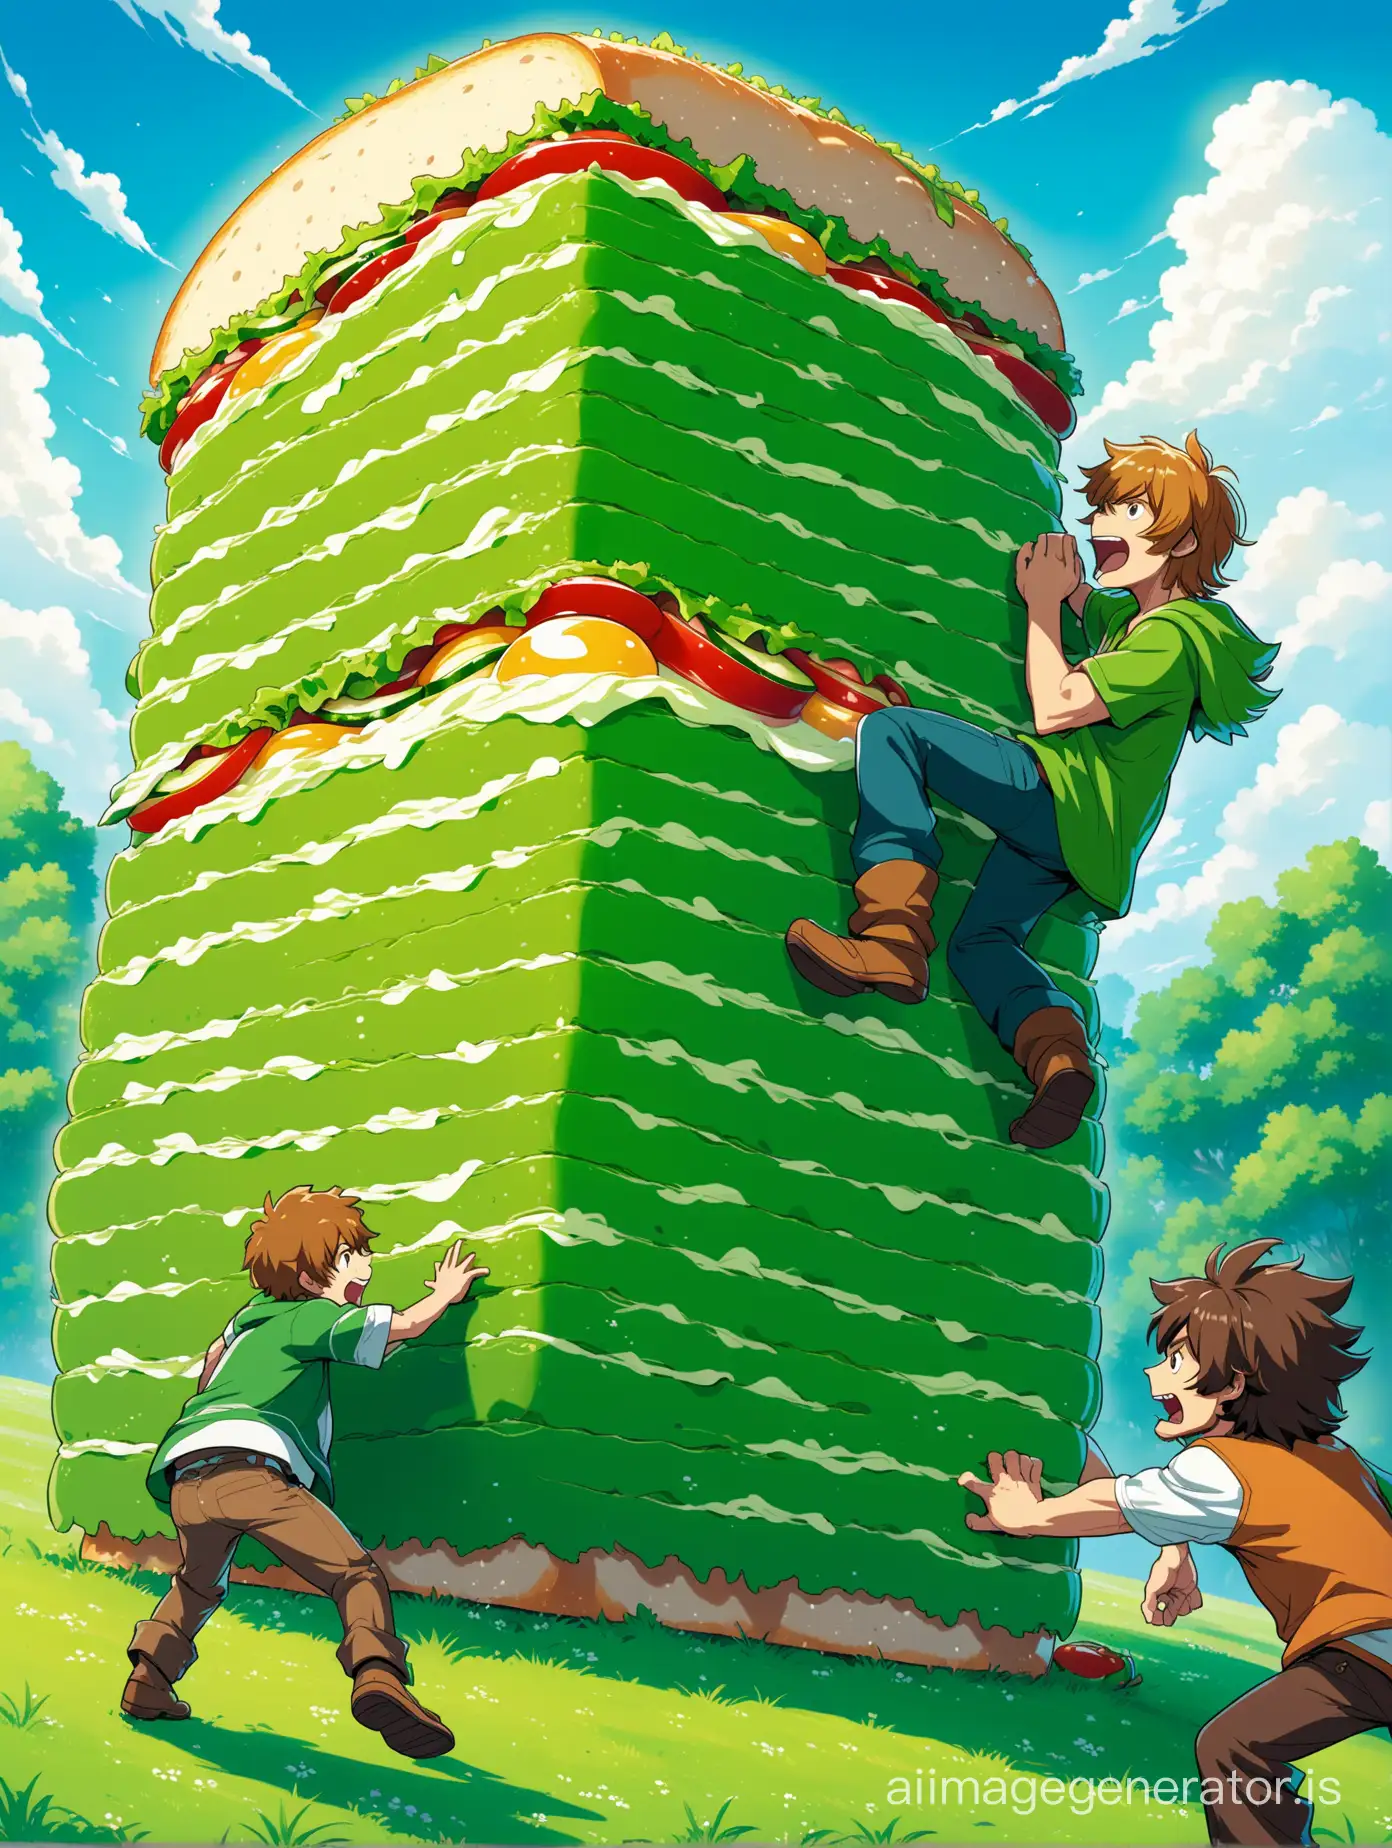 Shaggy battling a giant, living sandwich that's trying to eat him instead.